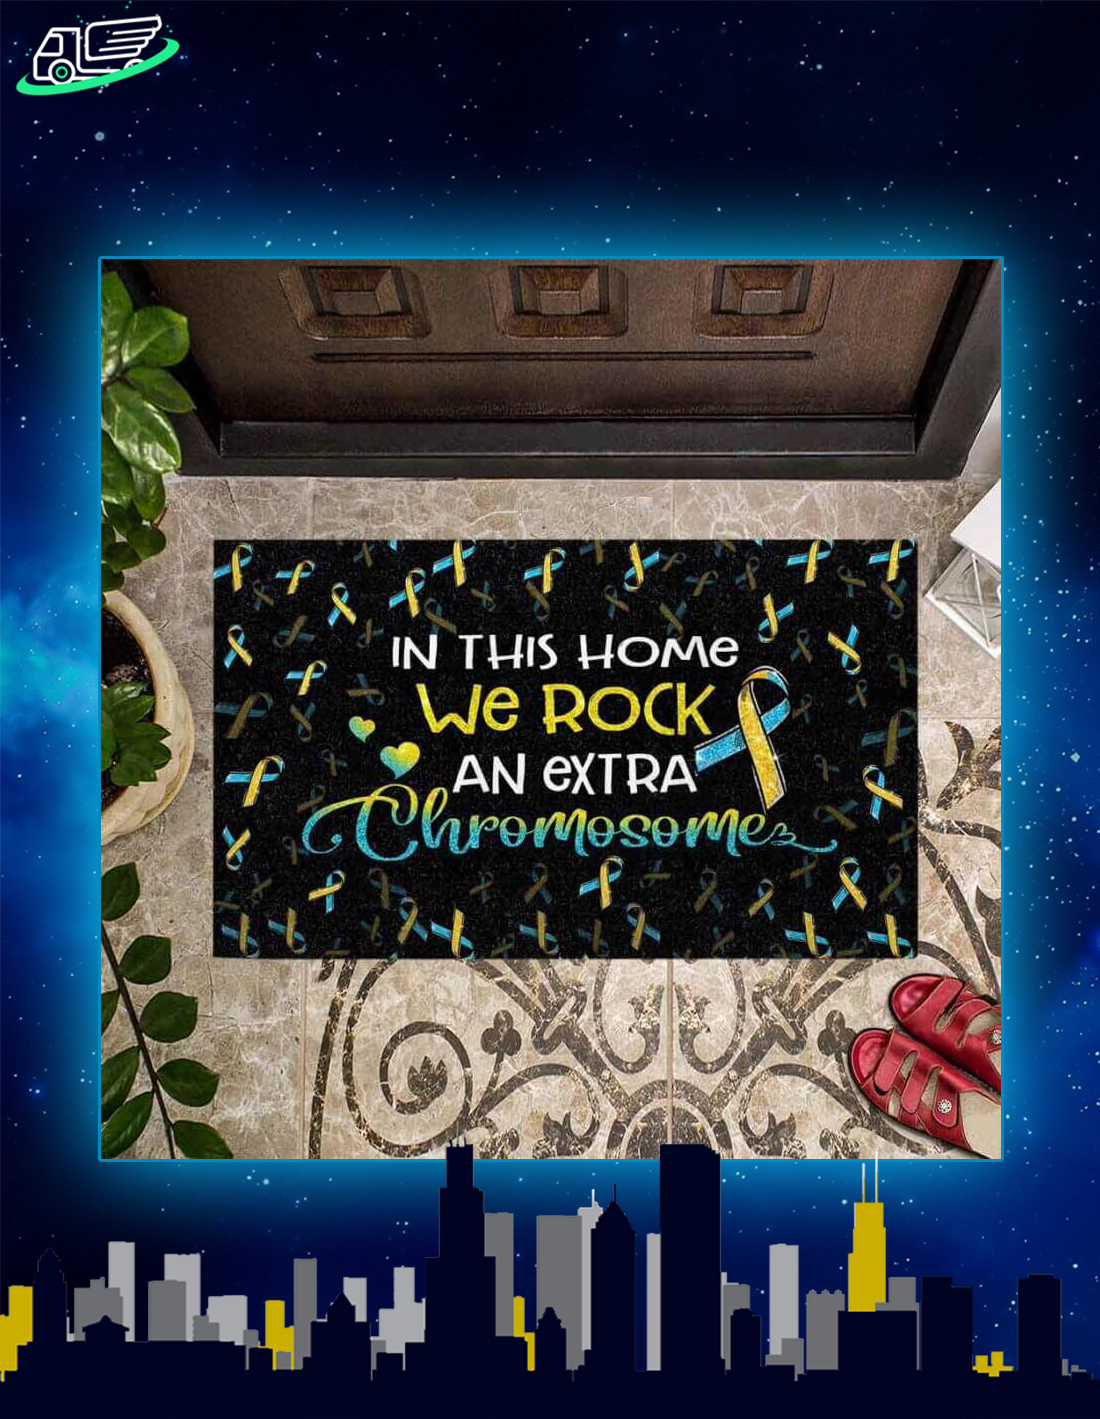 In this home we rock an extra chromosome down syndrome awareness doormat